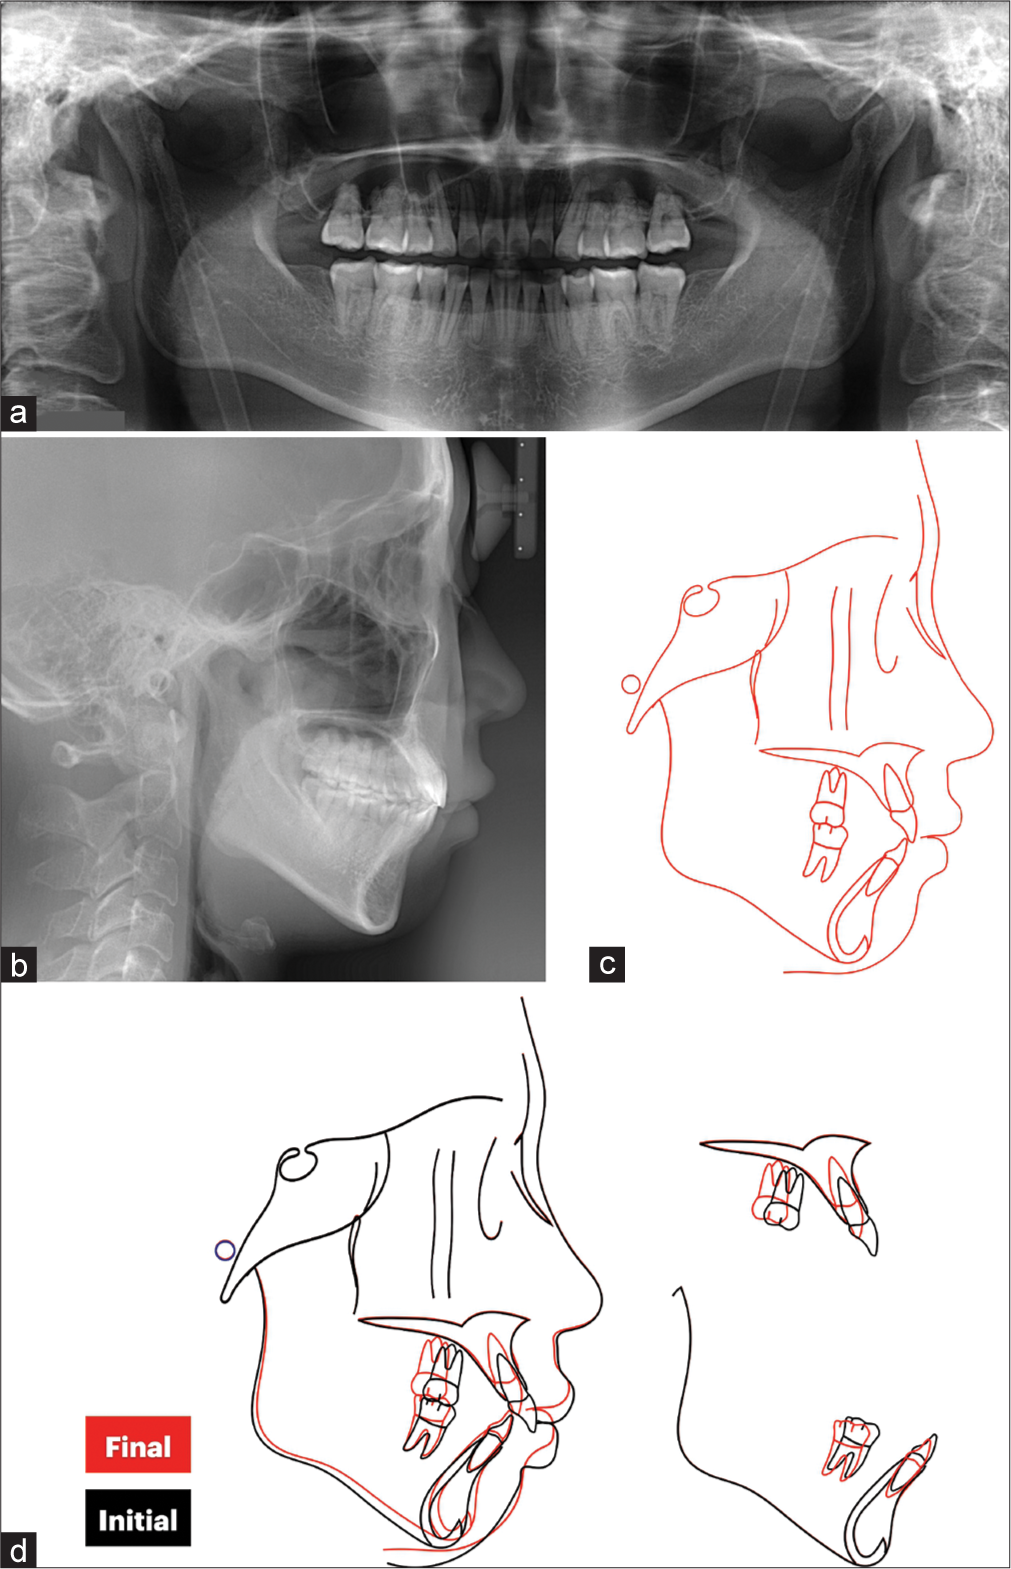 (a) Posttreatment panoramic radiograph, (b) posttreatment lateral cephalogram, (c) cephalometric tracing and (d) cephalometric superimposition showed the intrusive distalization of both arches.